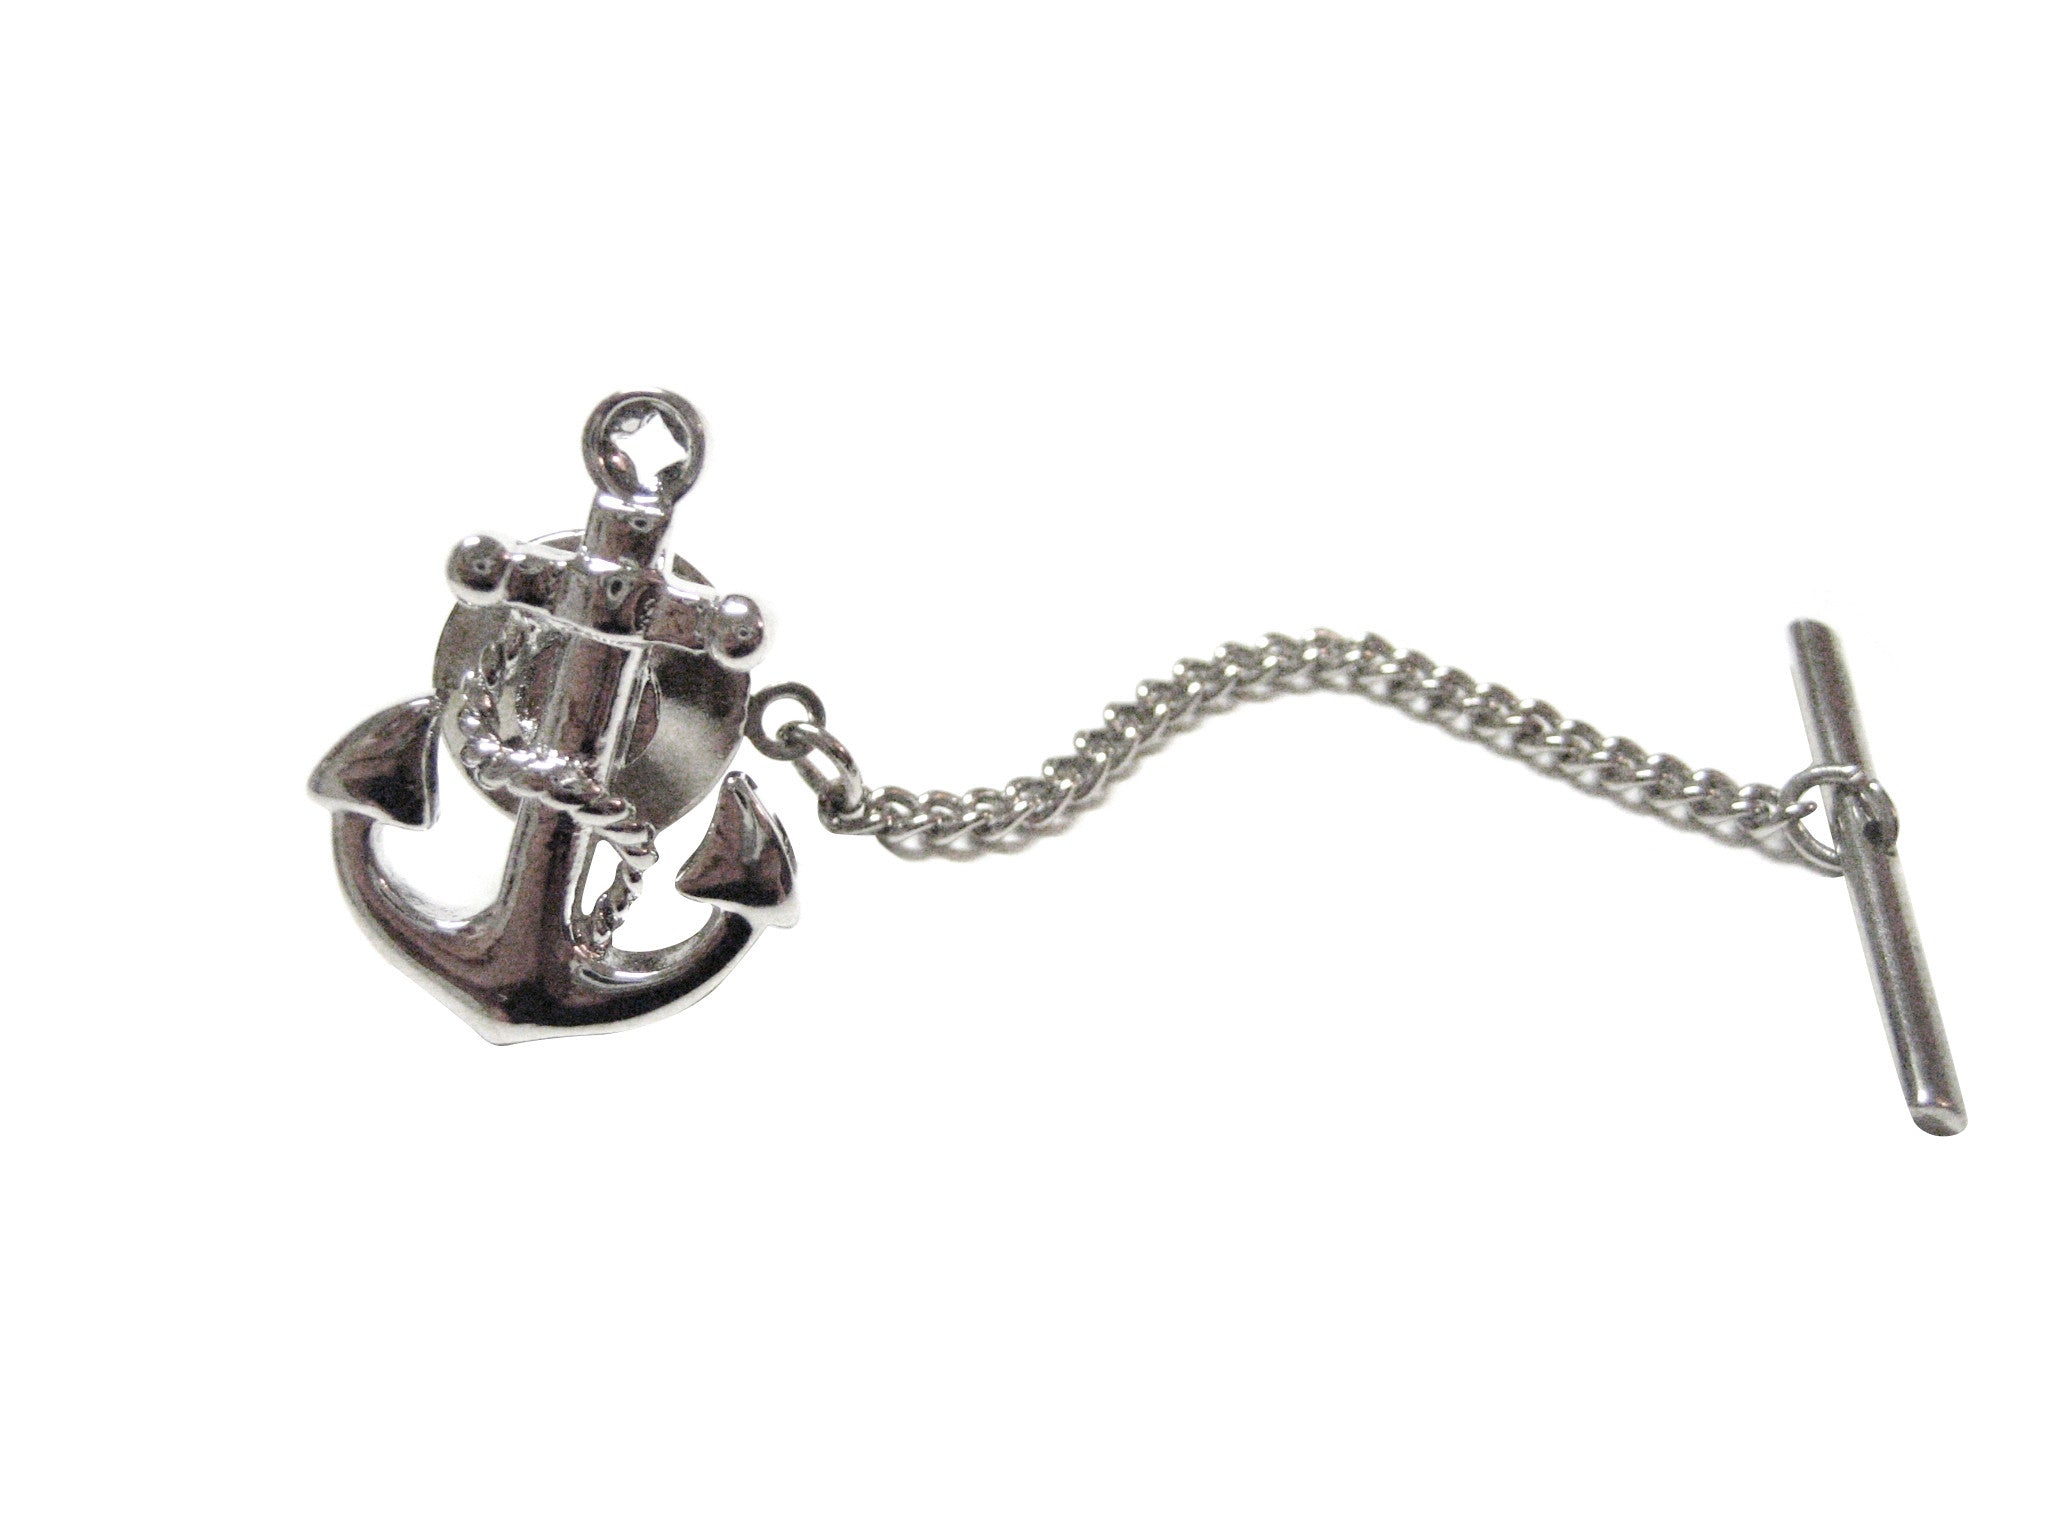 Detailed Nautical Anchor Tie Tack